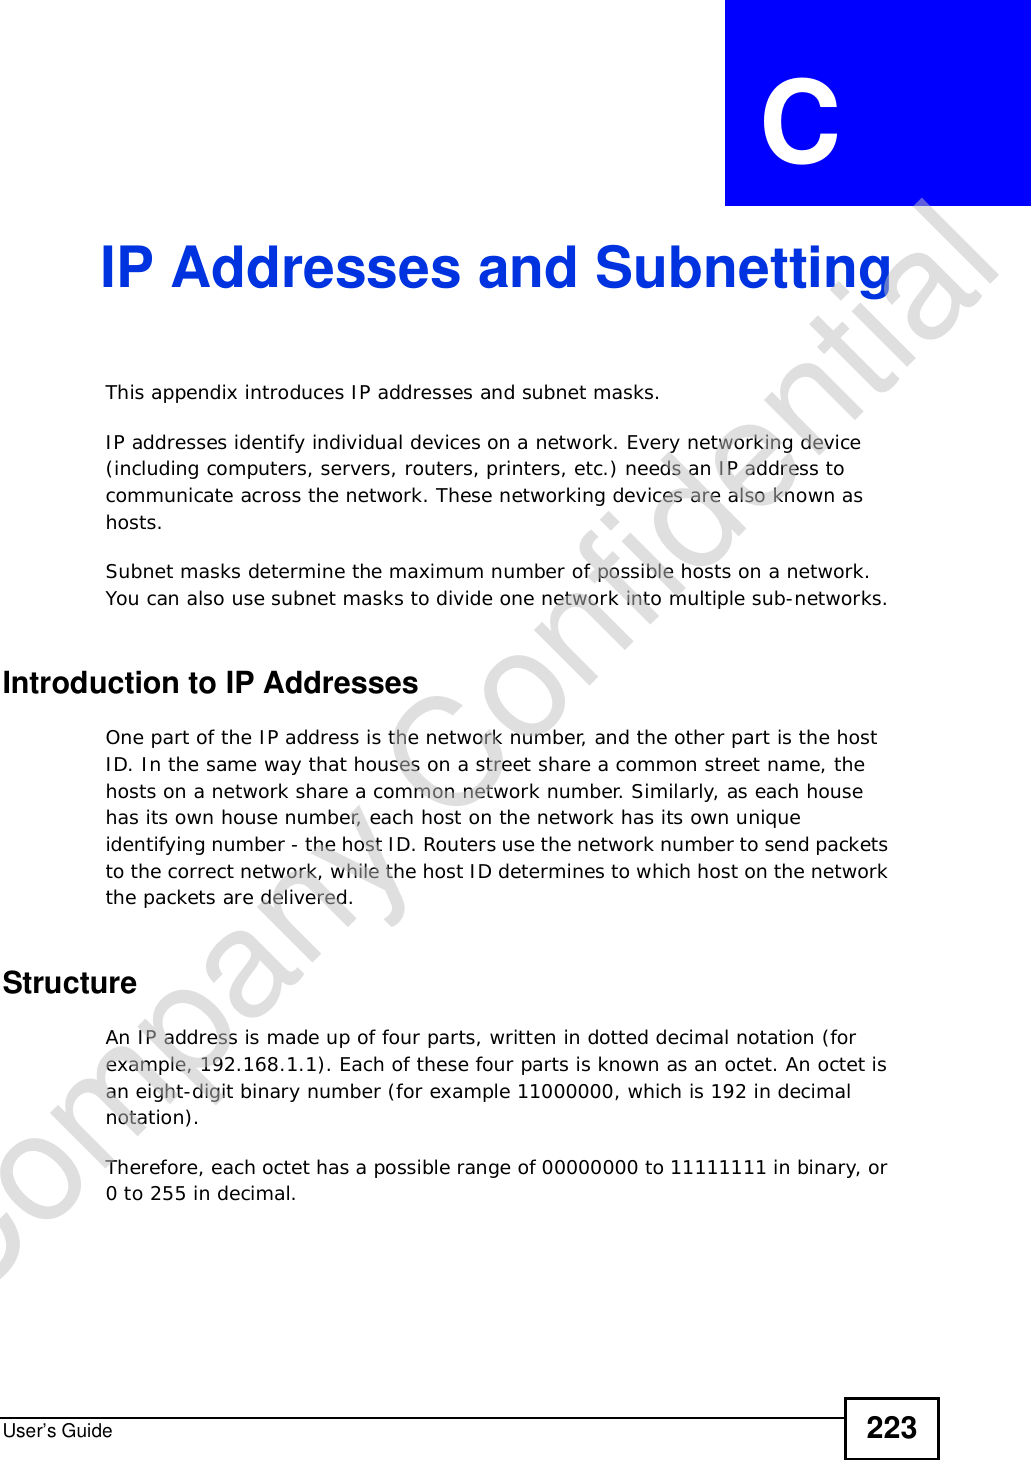 User’s Guide 223APPENDIX  C IP Addresses and SubnettingThis appendix introduces IP addresses and subnet masks. IP addresses identify individual devices on a network. Every networking device (including computers, servers, routers, printers, etc.) needs an IP address to communicate across the network. These networking devices are also known as hosts.Subnet masks determine the maximum number of possible hosts on a network. You can also use subnet masks to divide one network into multiple sub-networks.Introduction to IP AddressesOne part of the IP address is the network number, and the other part is the host ID. In the same way that houses on a street share a common street name, the hosts on a network share a common network number. Similarly, as each house has its own house number, each host on the network has its own unique identifying number - the host ID. Routers use the network number to send packets to the correct network, while the host ID determines to which host on the network the packets are delivered.StructureAn IP address is made up of four parts, written in dotted decimal notation (for example, 192.168.1.1). Each of these four parts is known as an octet. An octet is an eight-digit binary number (for example 11000000, which is 192 in decimal notation). Therefore, each octet has a possible range of 00000000 to 11111111 in binary, or 0 to 255 in decimal.Company Confidential